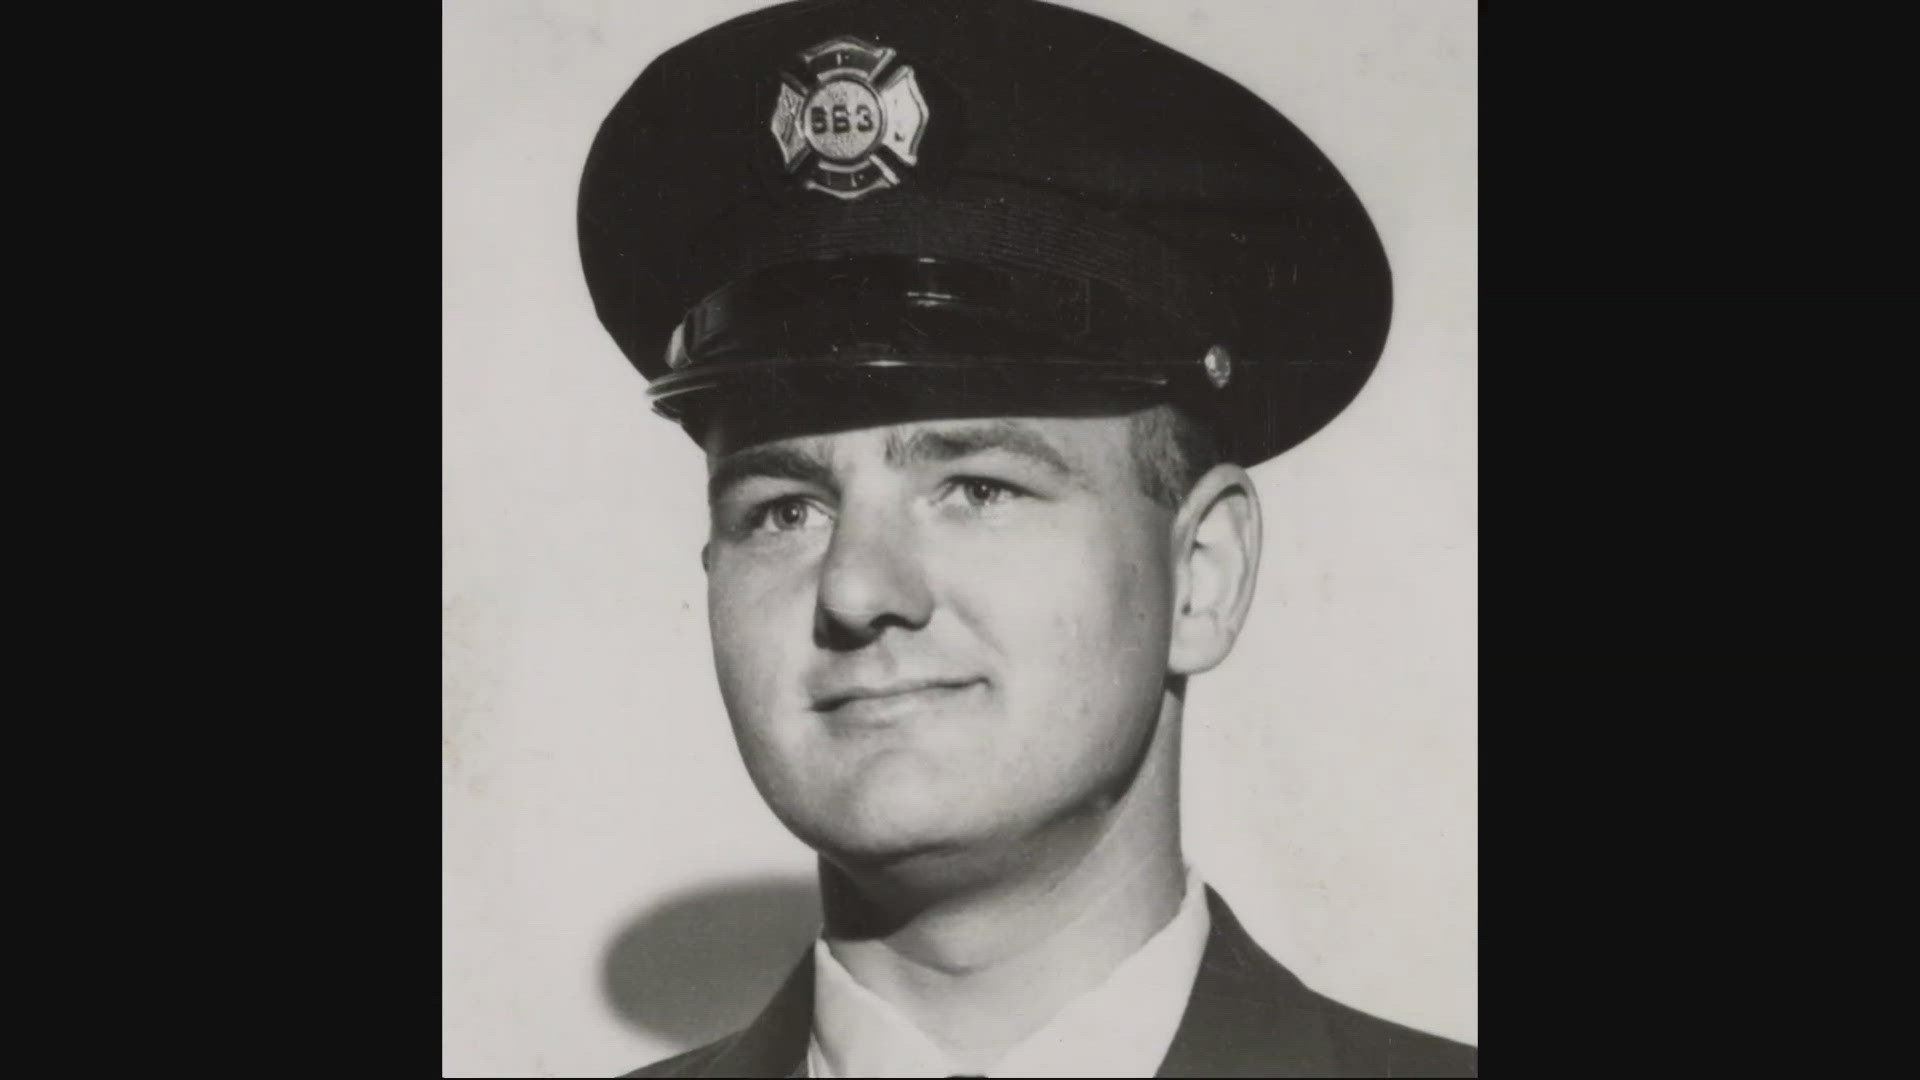 Decades after Roger Brandenburg died from heart problems attributed to his firefighter career, his family is receiving closure.